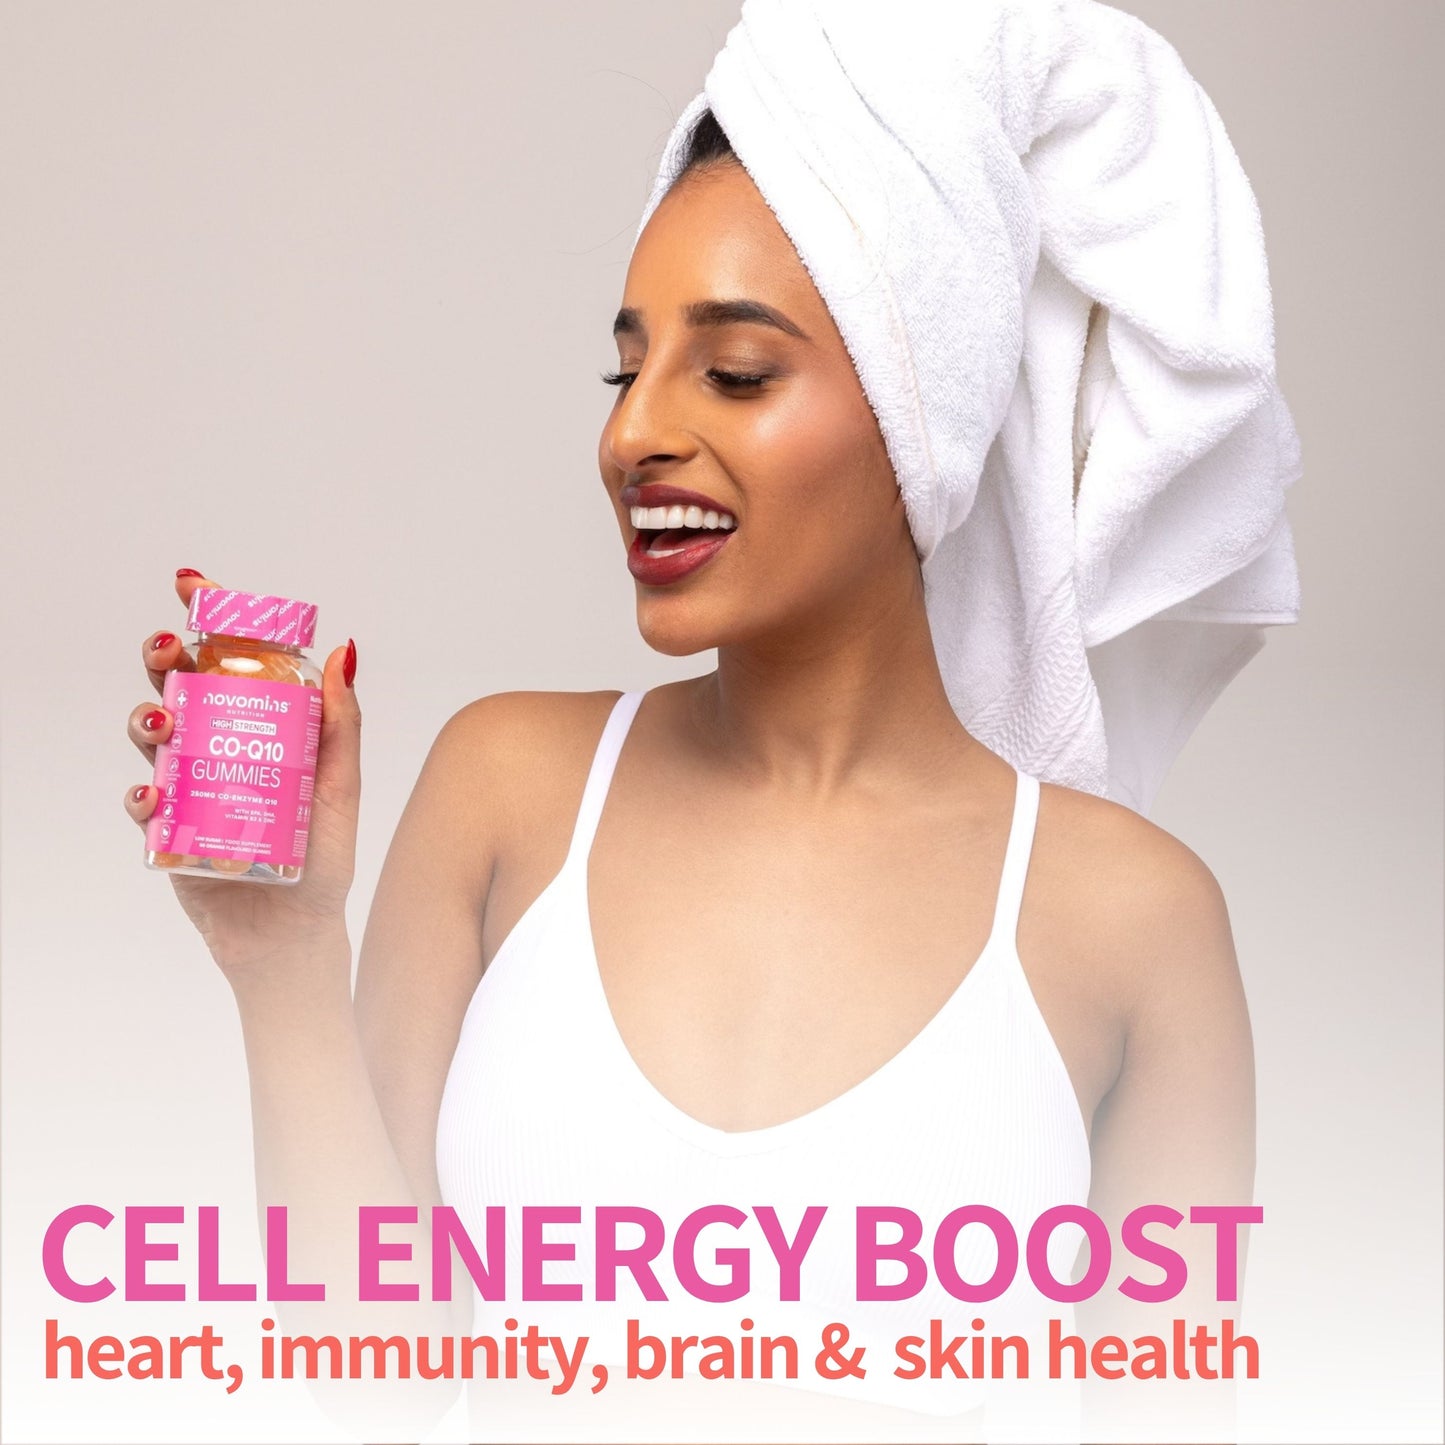 Cell energy boost coq10 novomins